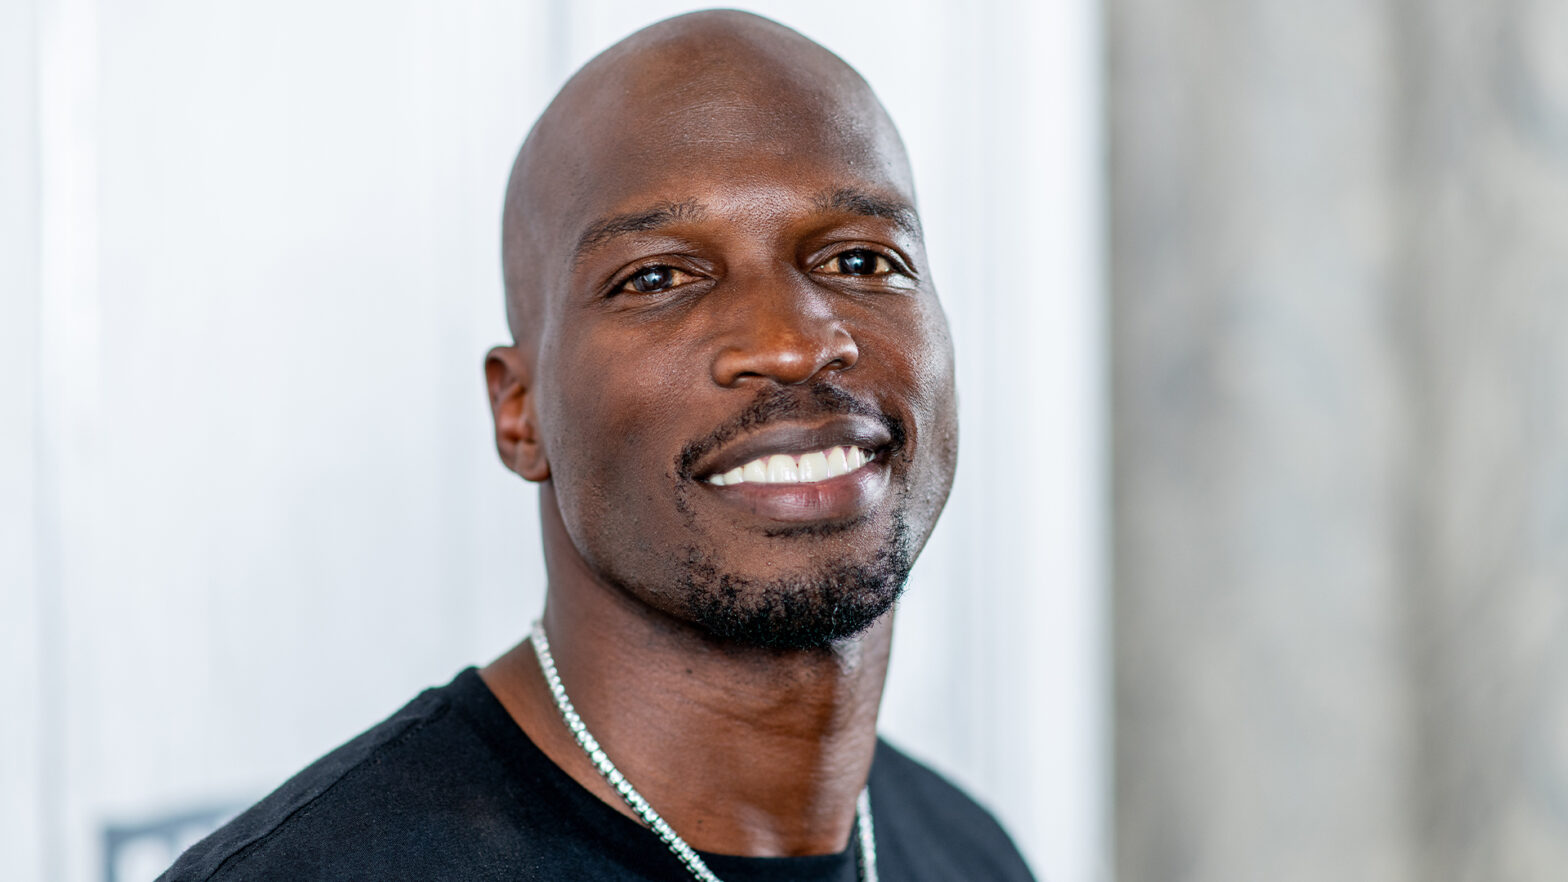 Chad Johnson Says He Lived At Paul Brown Stadium While Playing For The Bengals — 'I Ain't Want To Spend No Money'